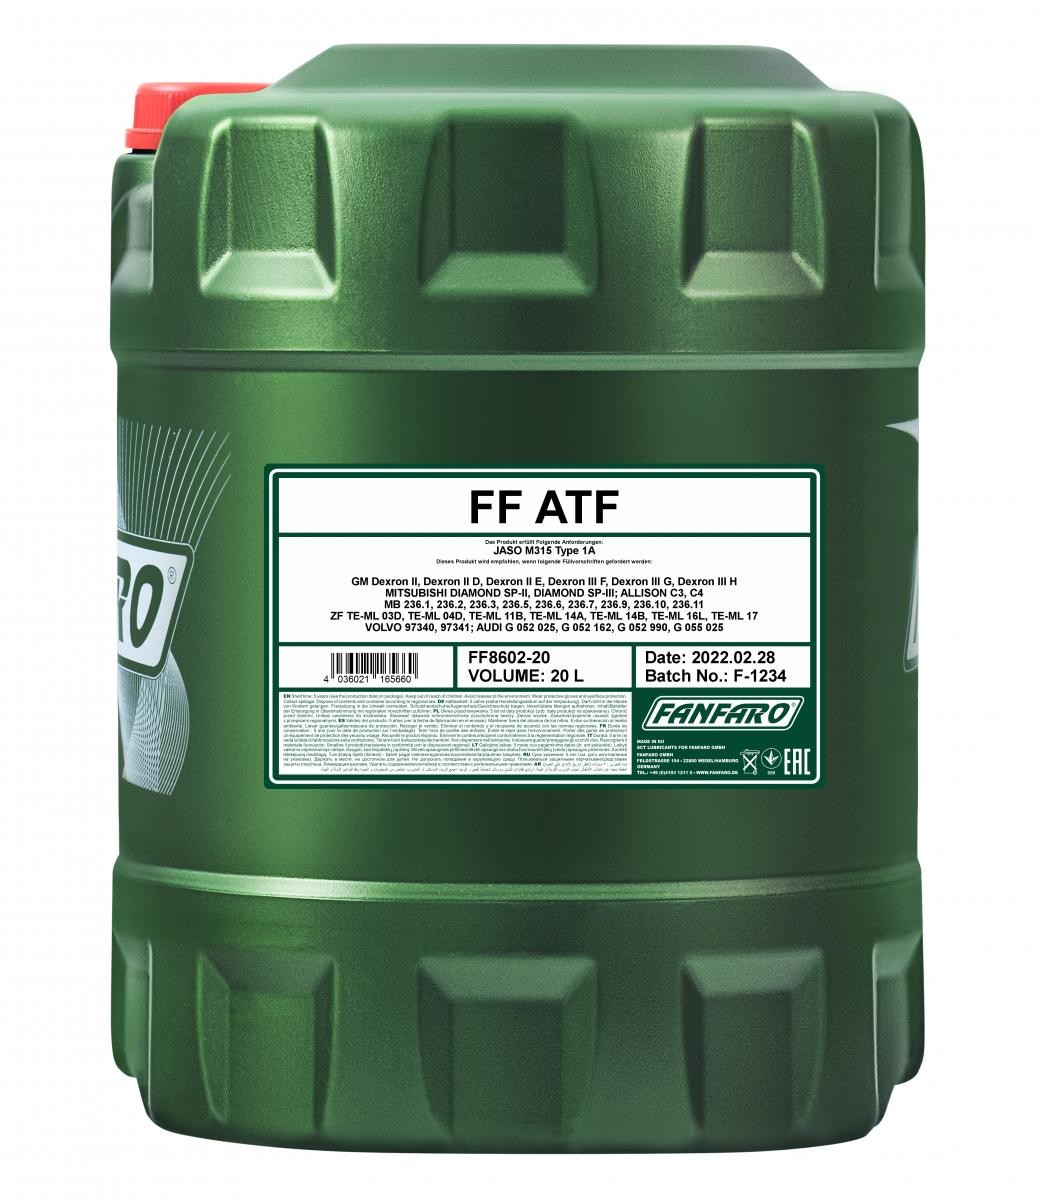 Great value for money - FANFARO Automatic transmission fluid FF8602-20